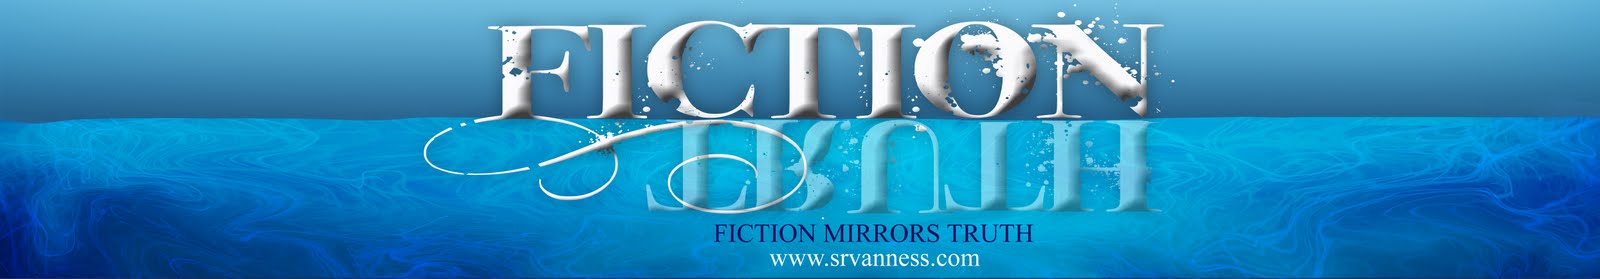 Fiction Mirrors Truth